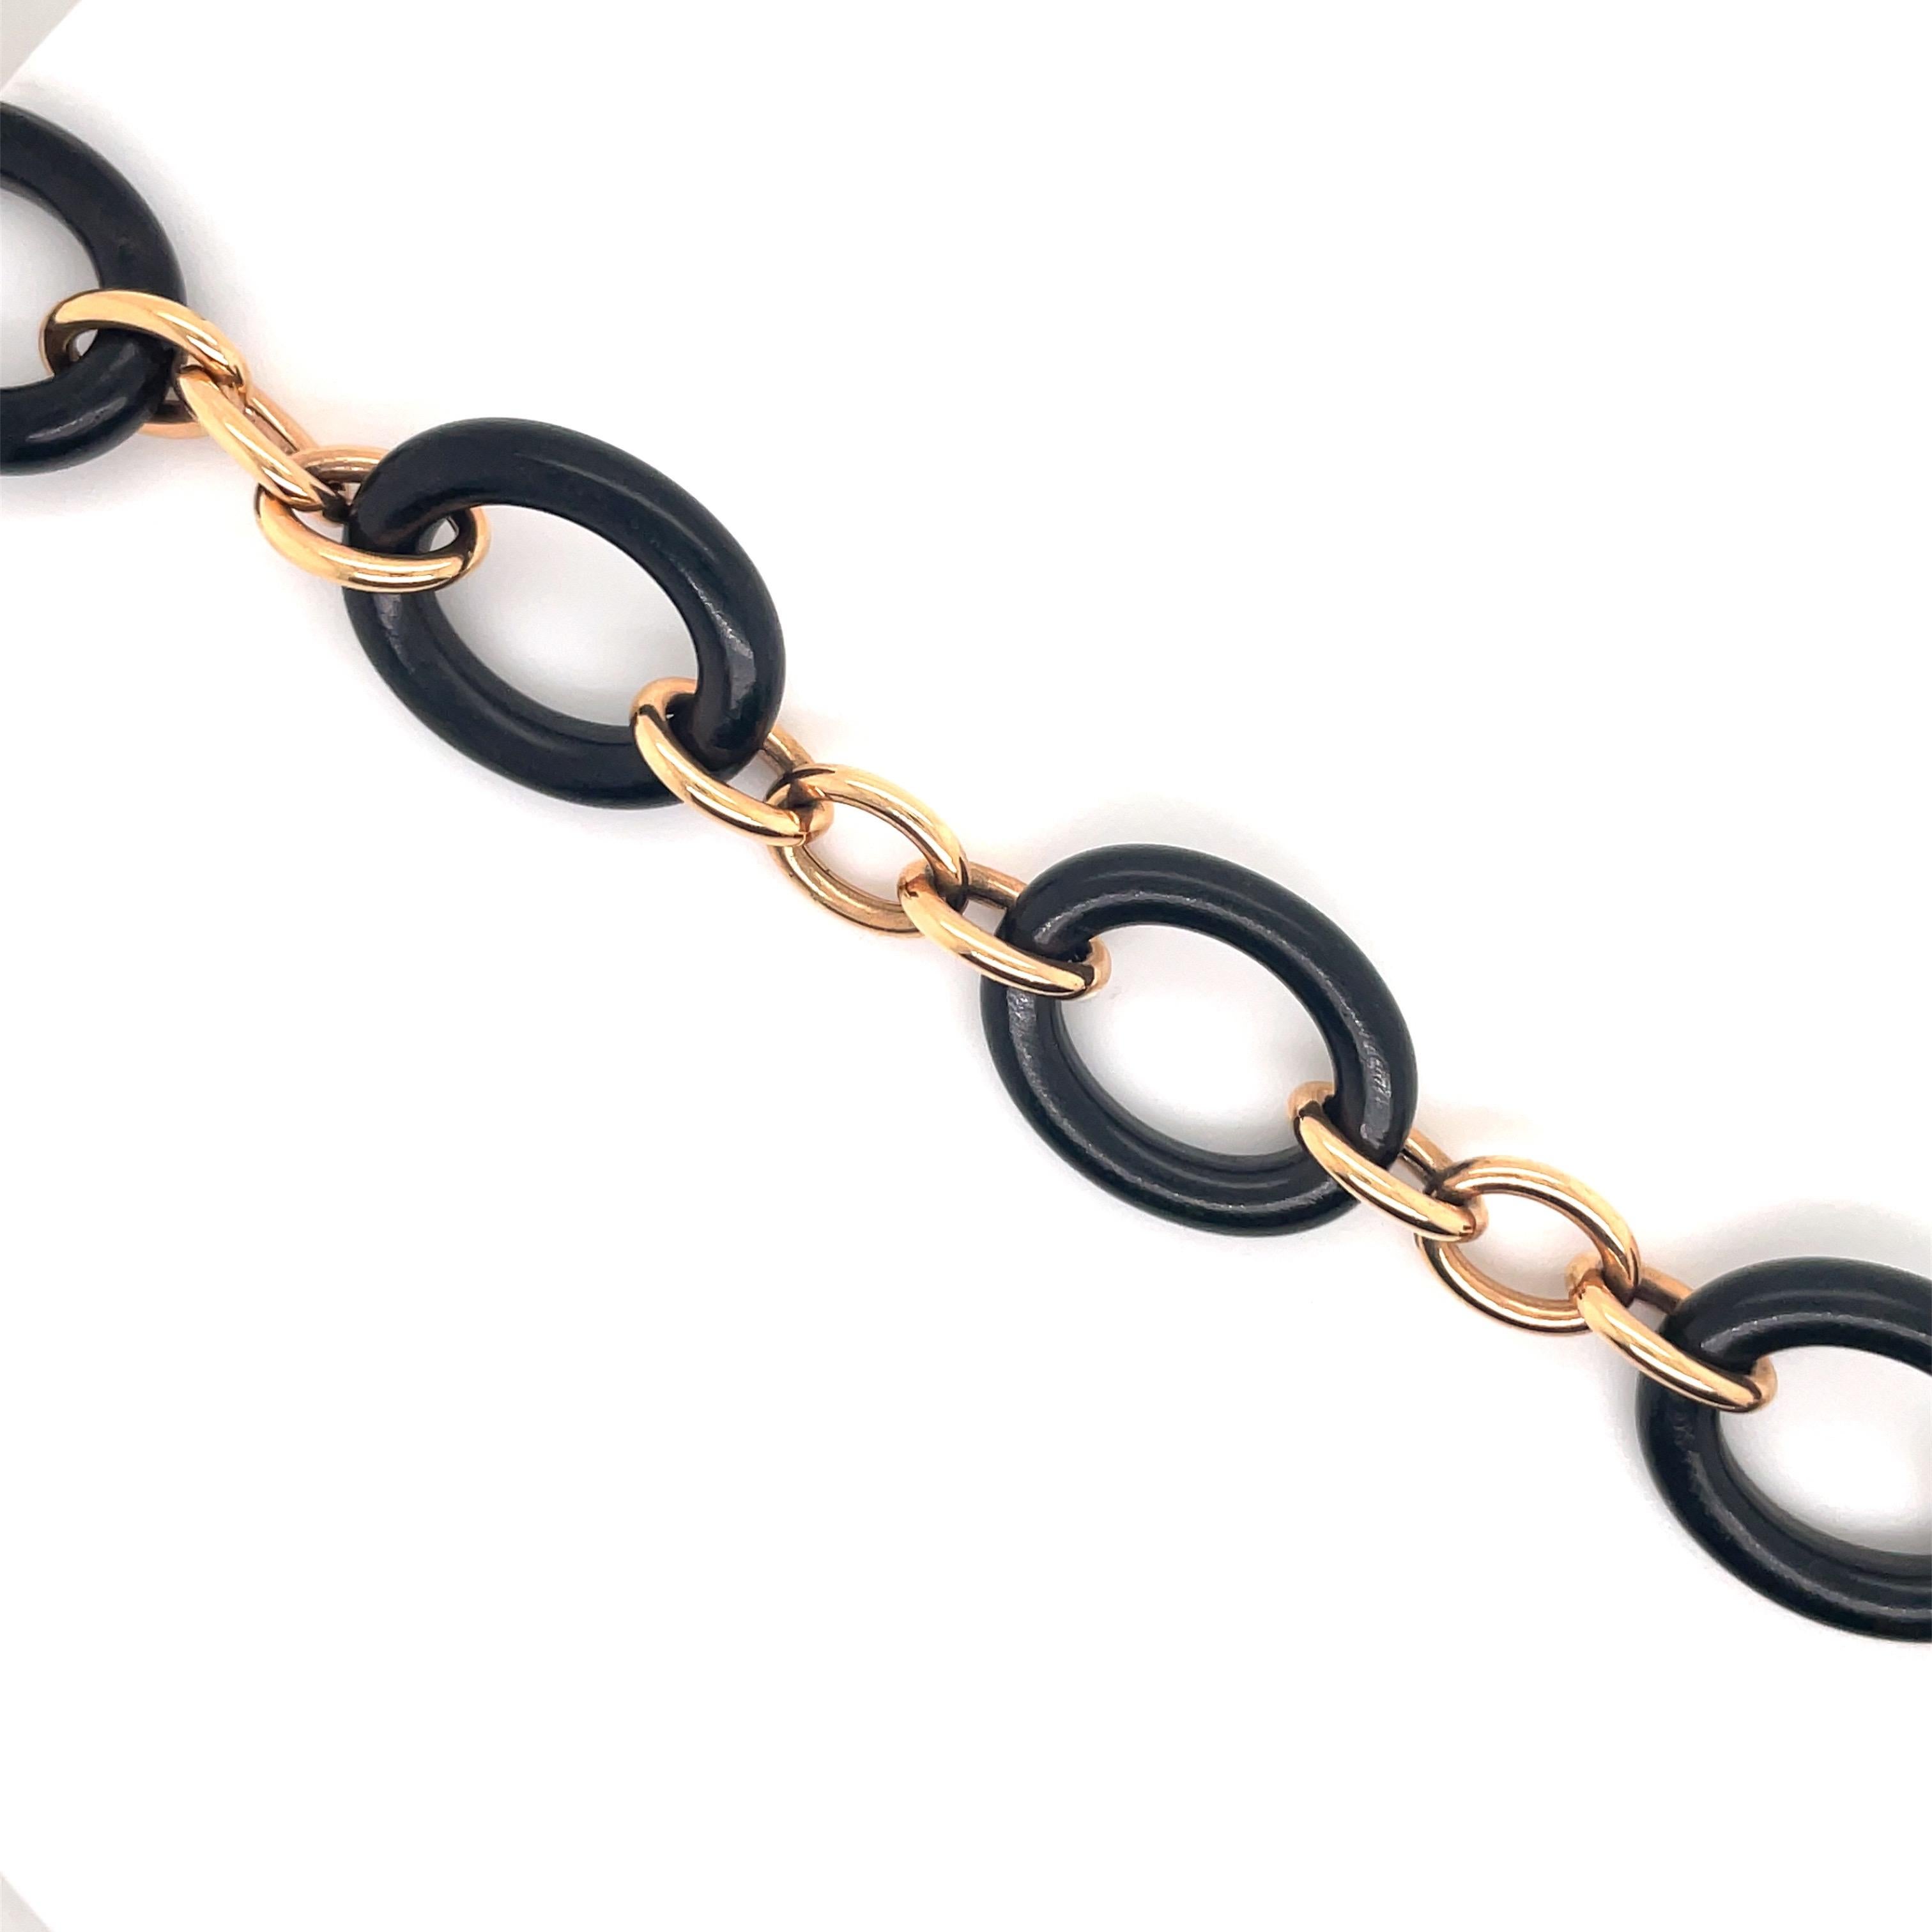 OROMALIA link bracelet featuring 5 Ebony Oval wood links between each section of 3 rose gold links.
Wood Link 1 inch x 0.75 inches
Rose Gold Link 0.50 inches x 0.38 inches
Can be shortened 